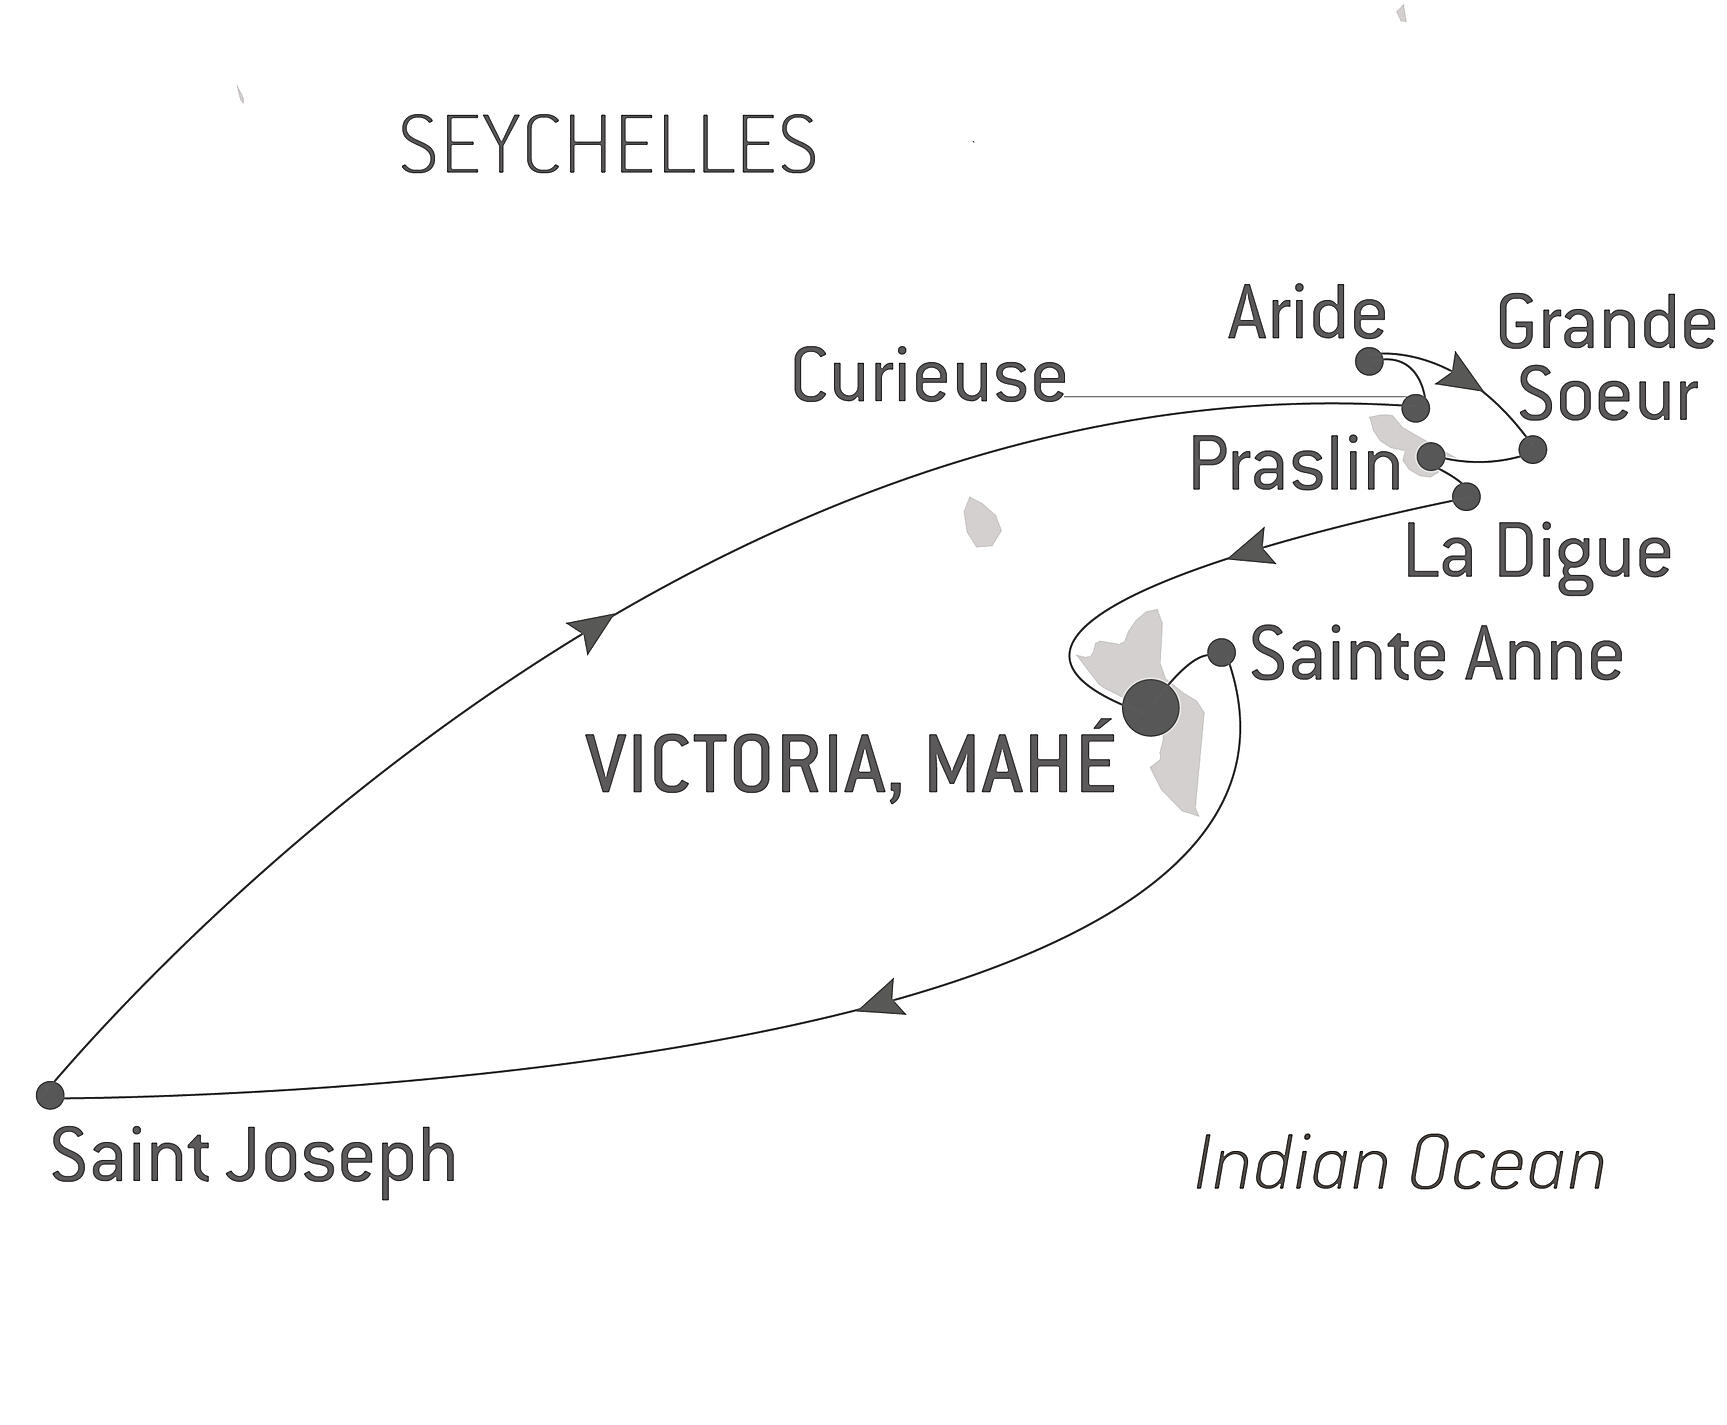 The Essential Seychelles From Victoria Mahe To Victoria Mahe